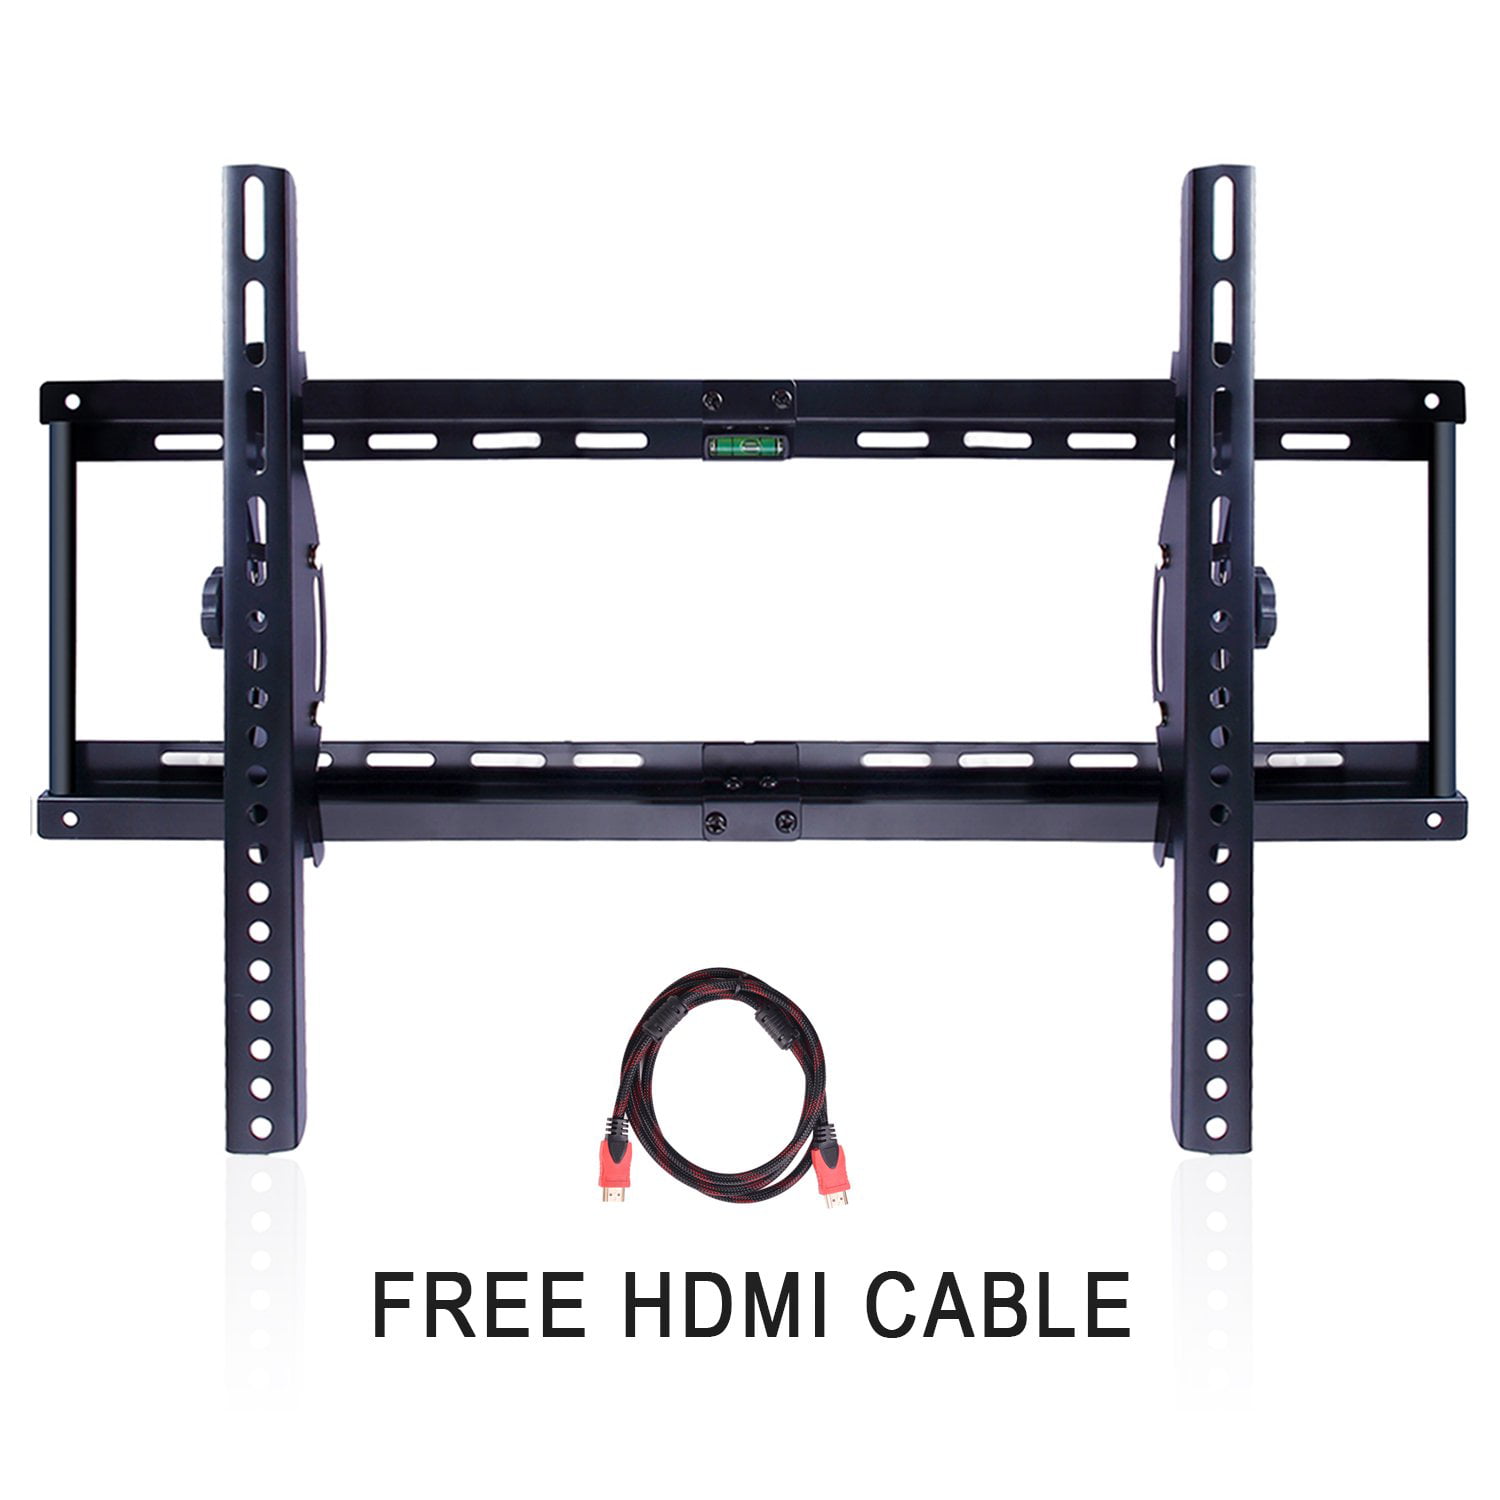 Details about   TV WALL BRACKET MOUNT SLIM FOR 32 42 48 52 55 60 65 70 INCH 3D LCD LED PLASMA 